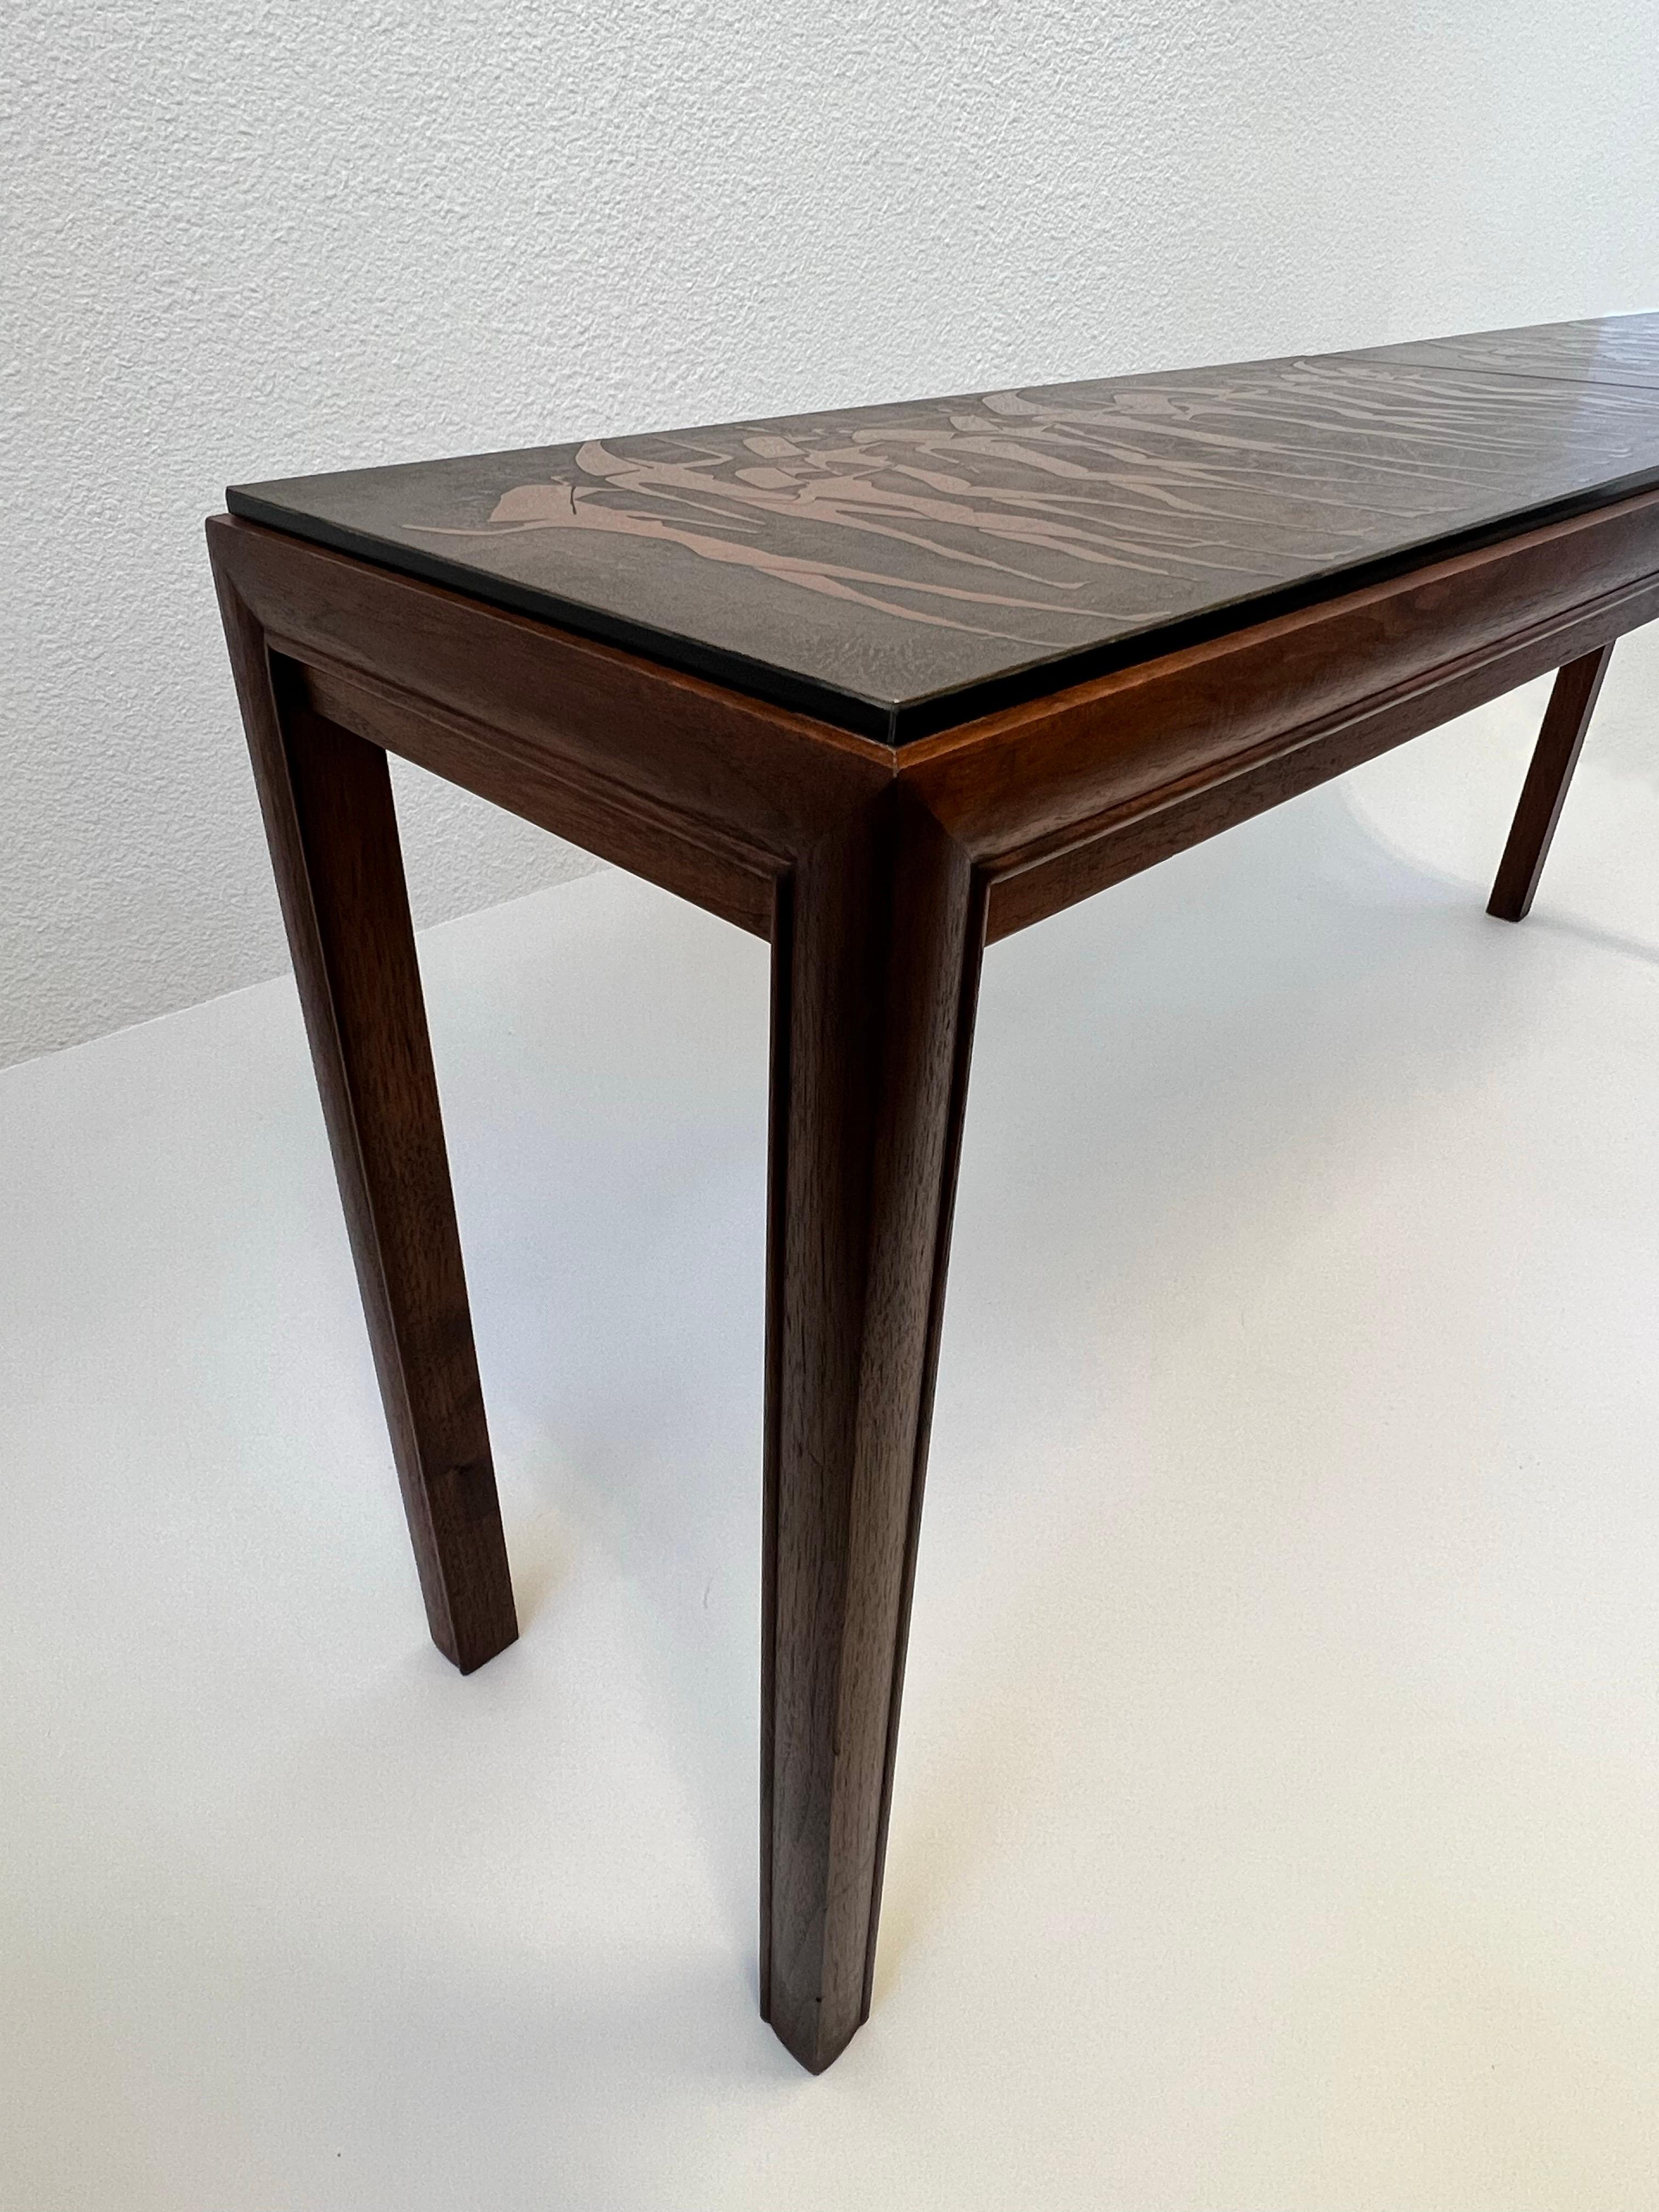 Stained Italian Brutalist Walnut and Copper Console Table by G. Urso For Sale